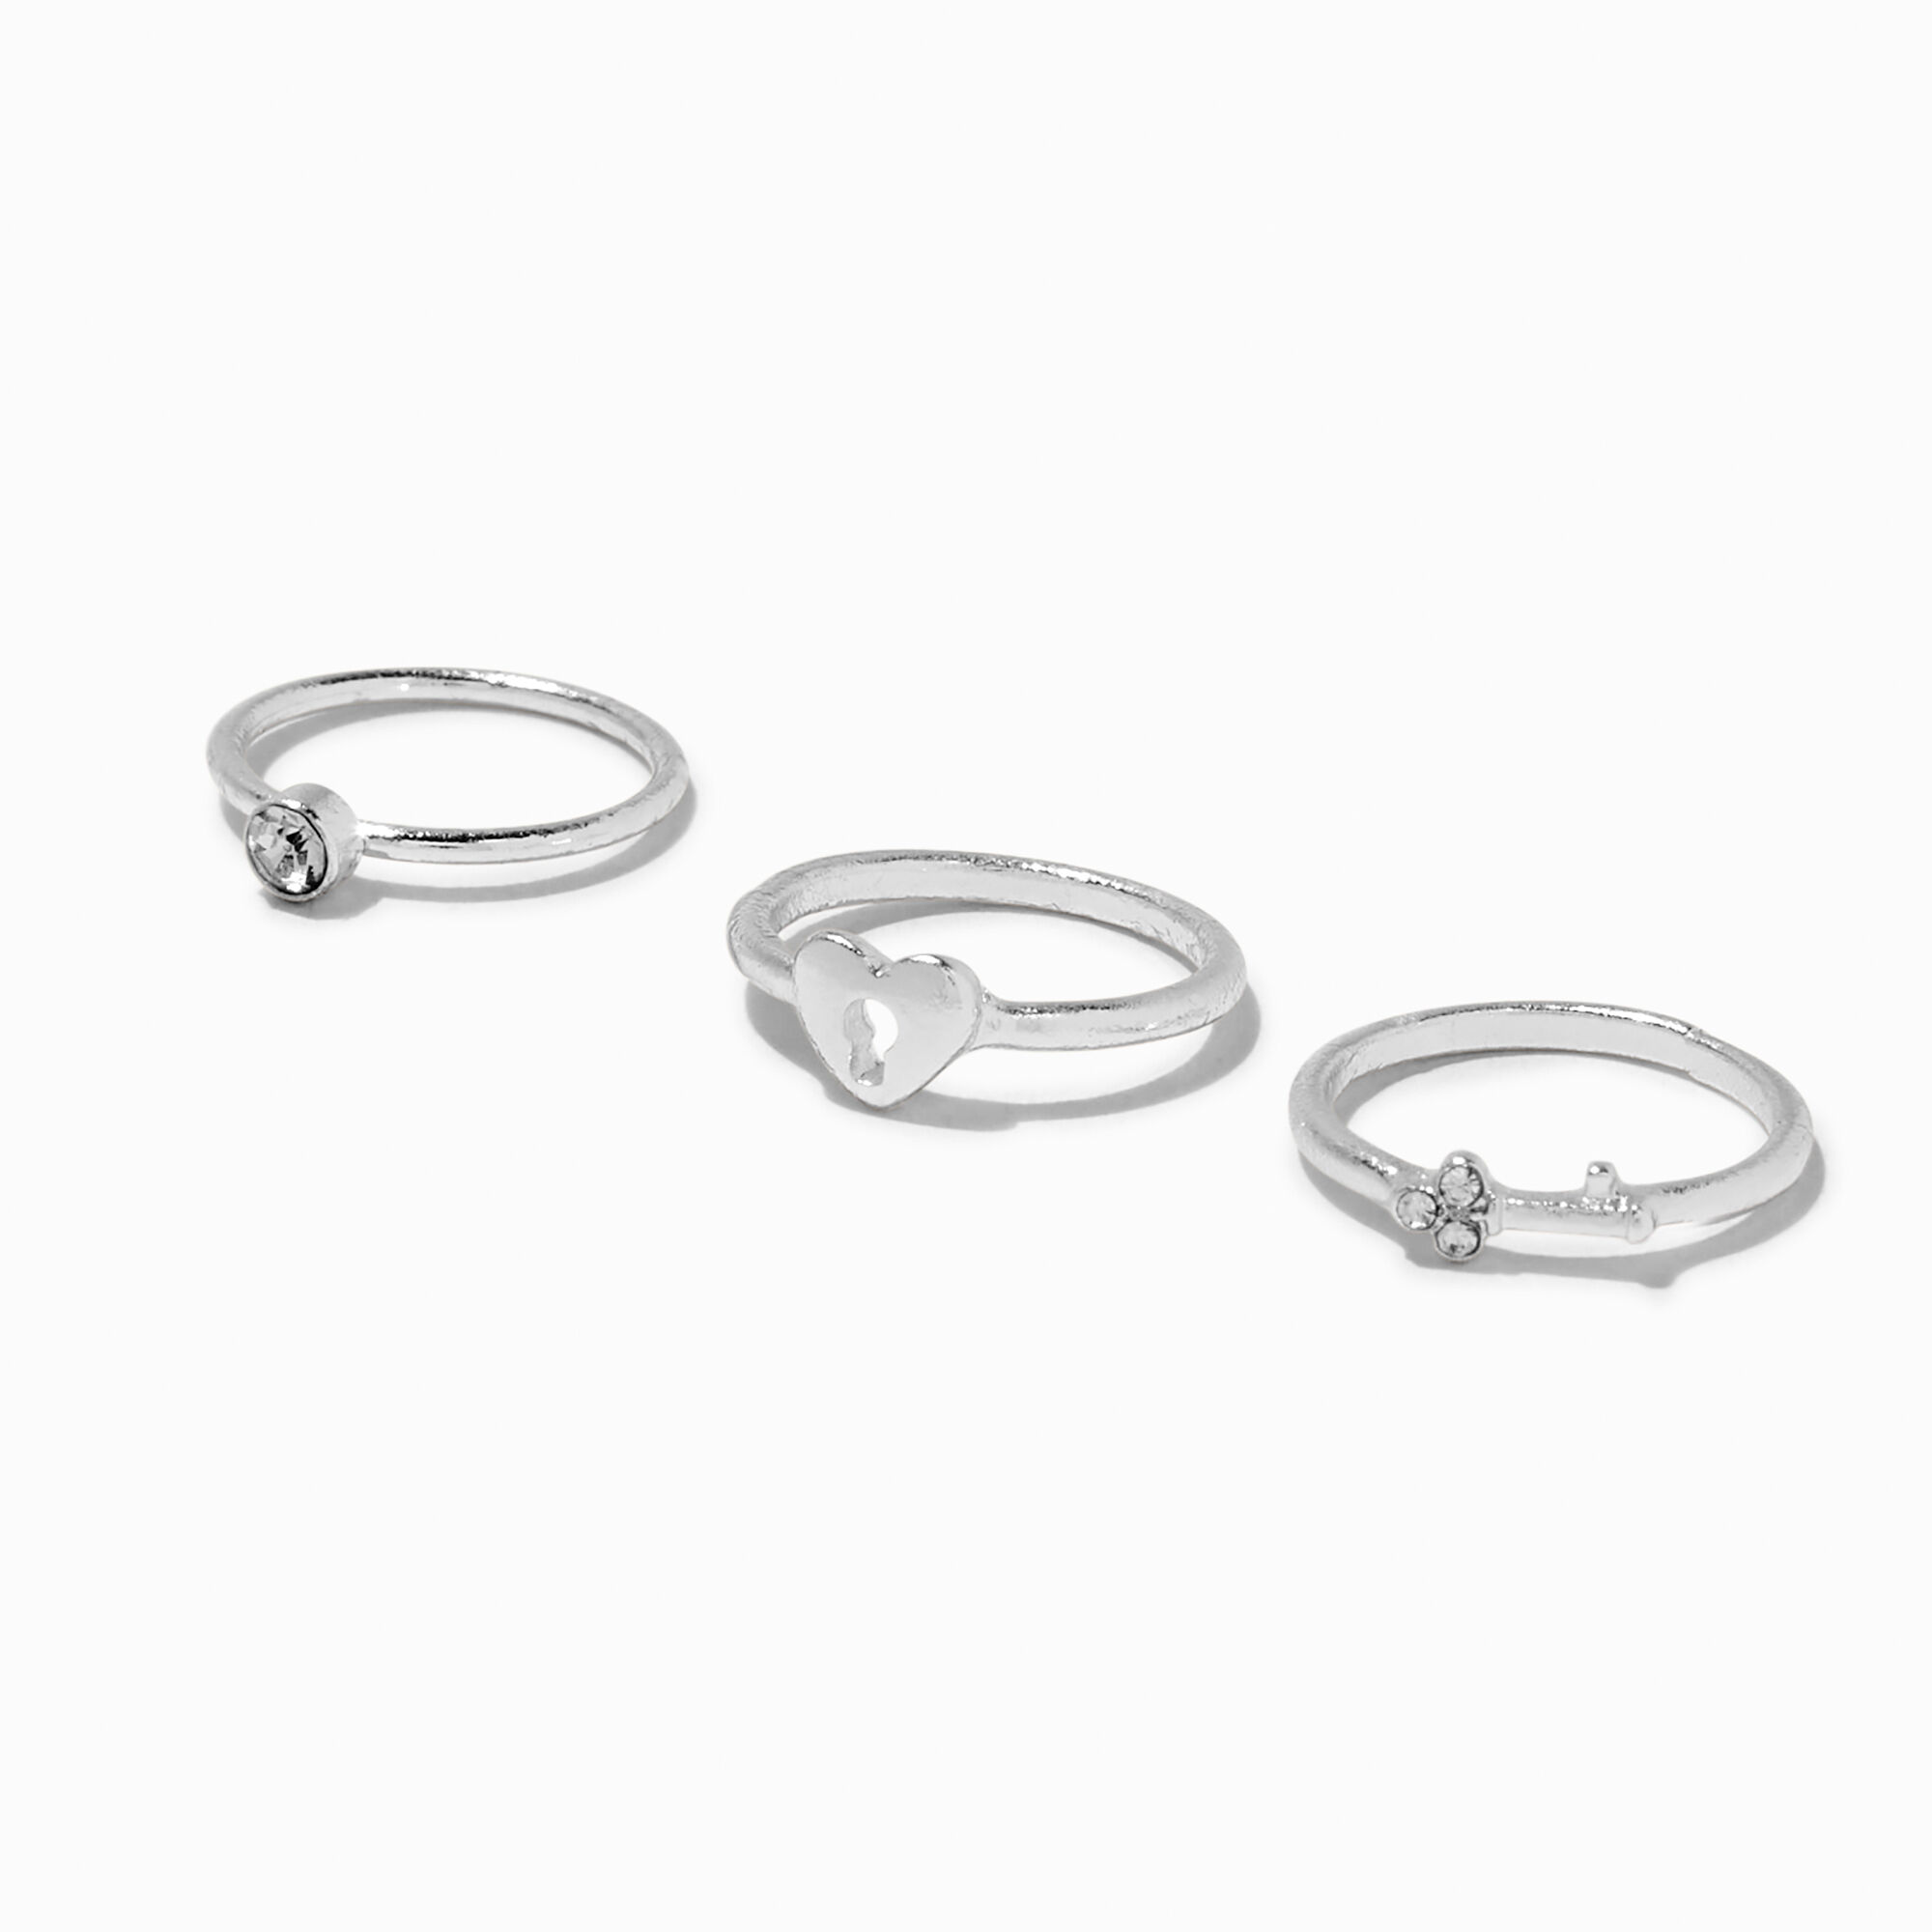 View Claires Tone Heart Midi Rings 3 Pack Silver information